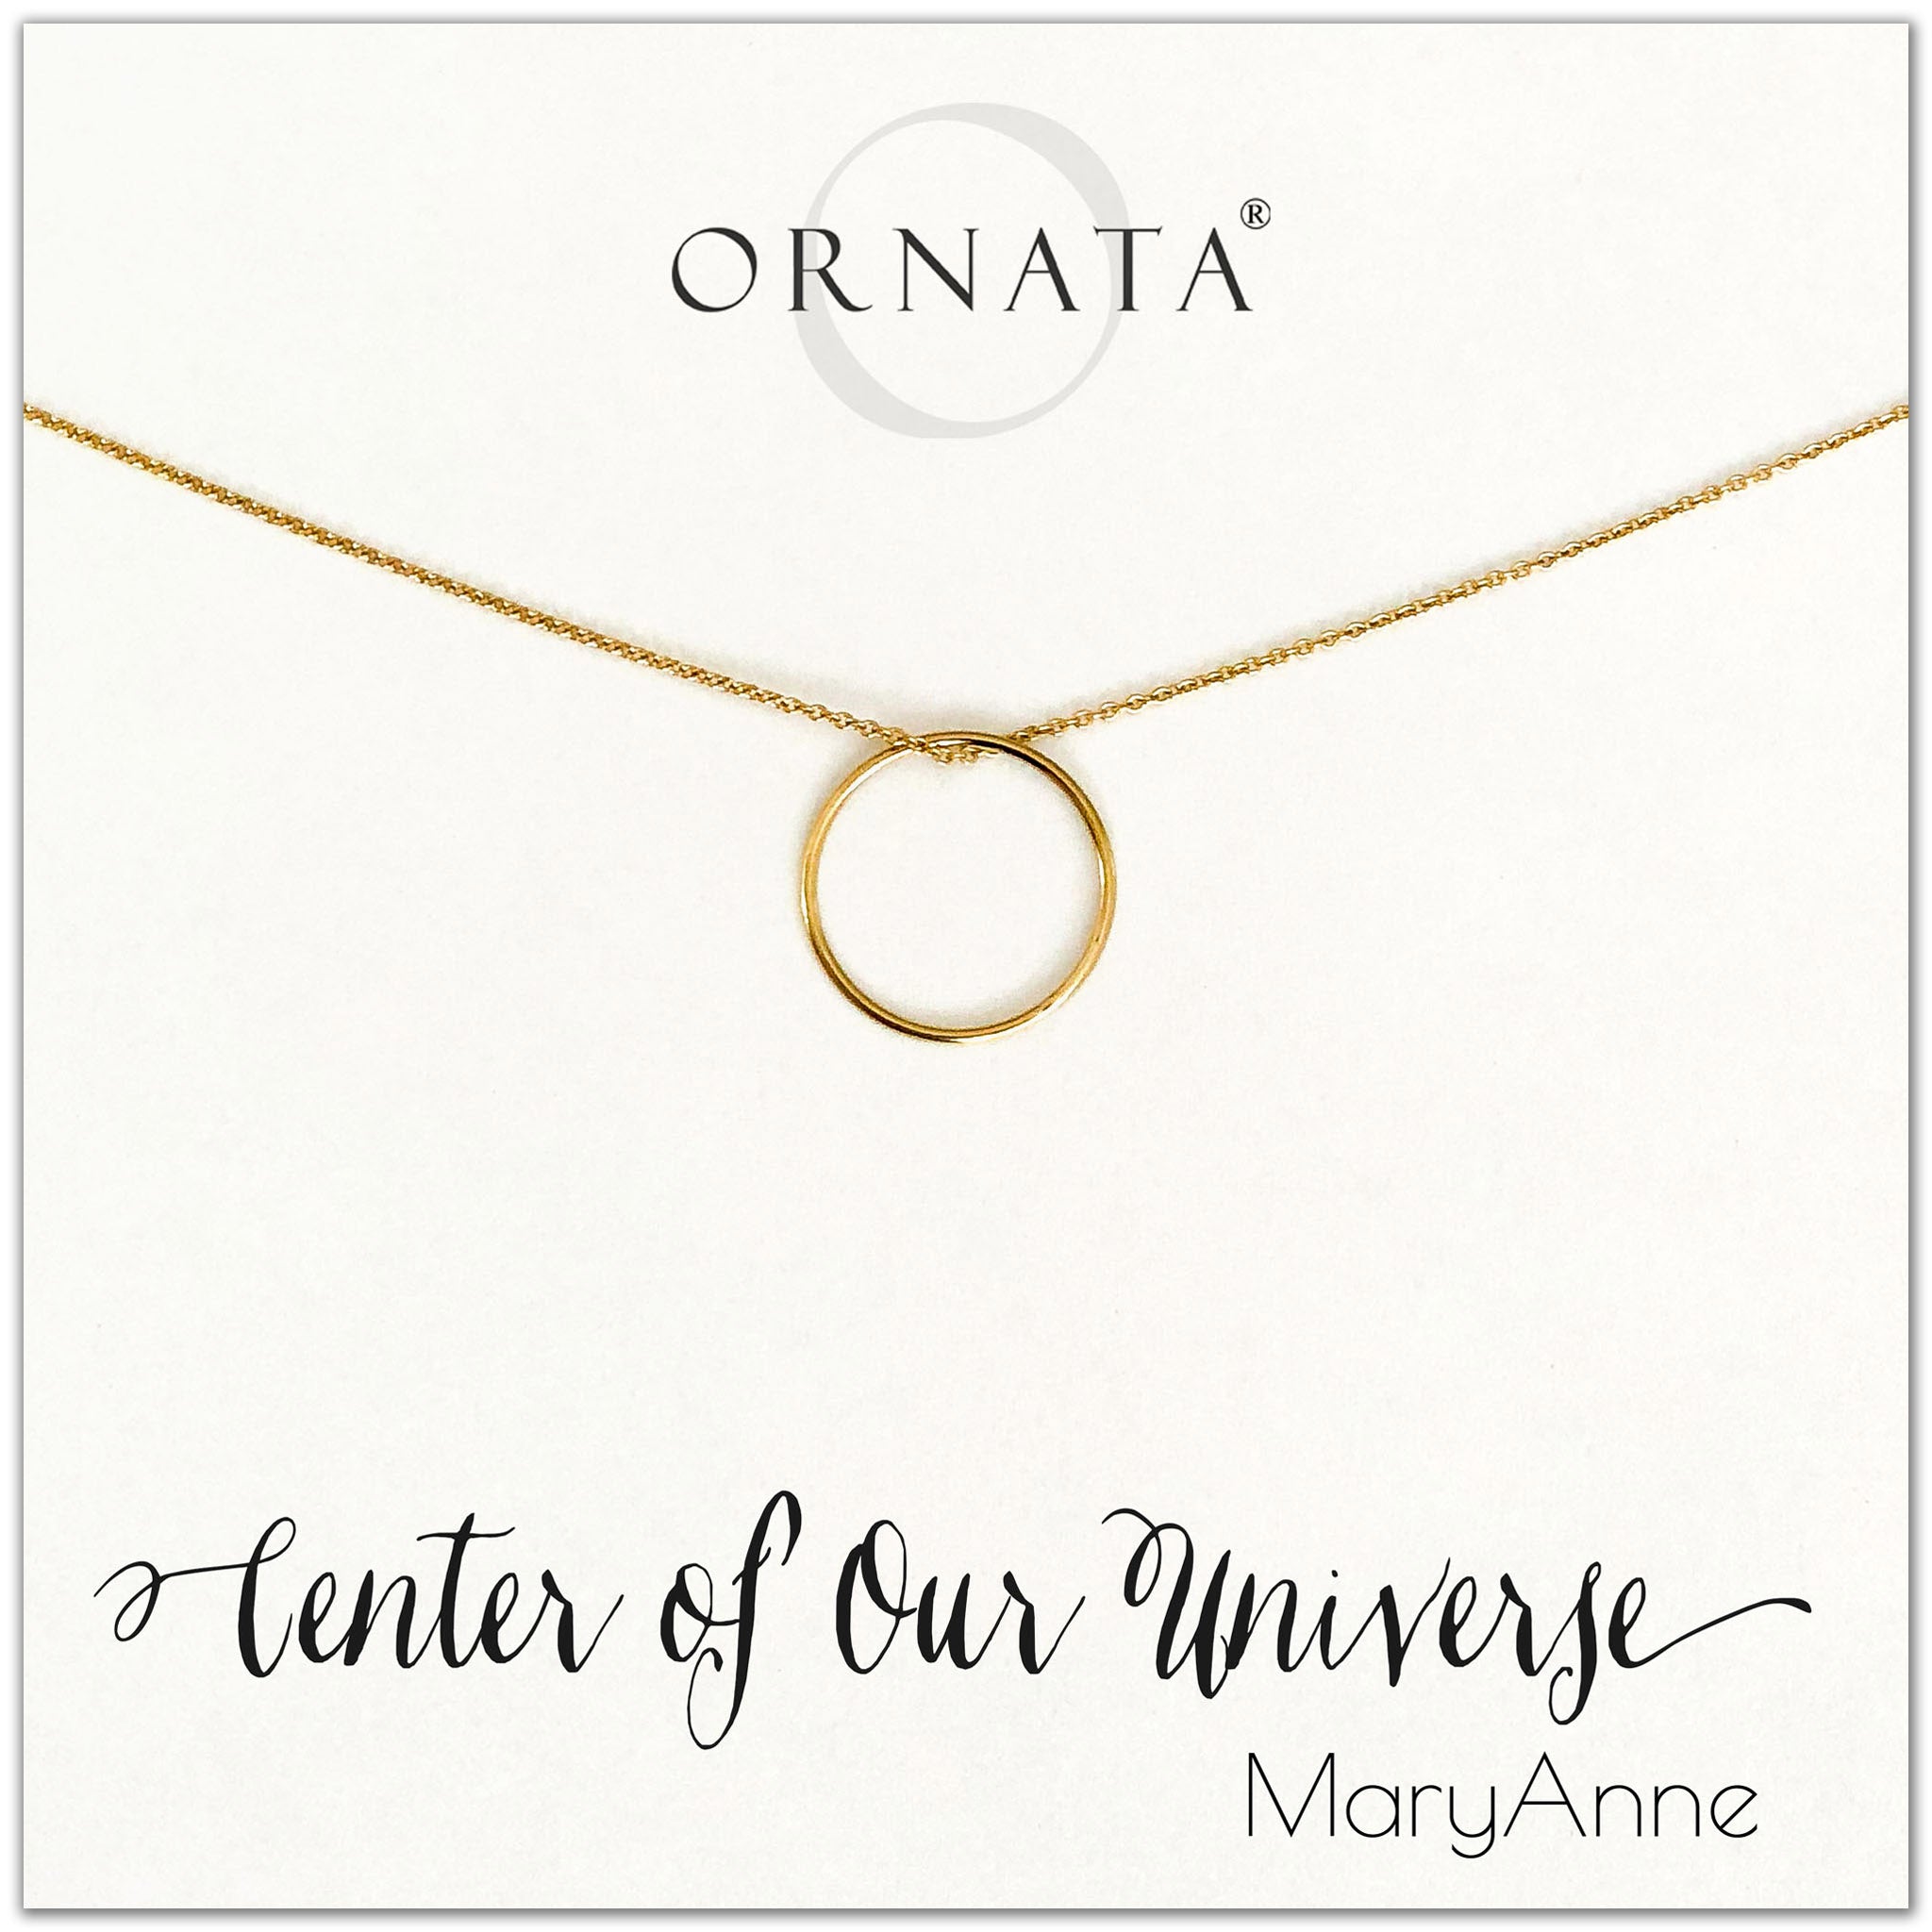 Center of our Universe necklace - personalized gold necklaces. Our 14 karat gold filled custom jewelry is a perfect gift for best friends, sisters, daughters, or mothers. Inspirational jewelry is also a good gift for Mother’s Day. 